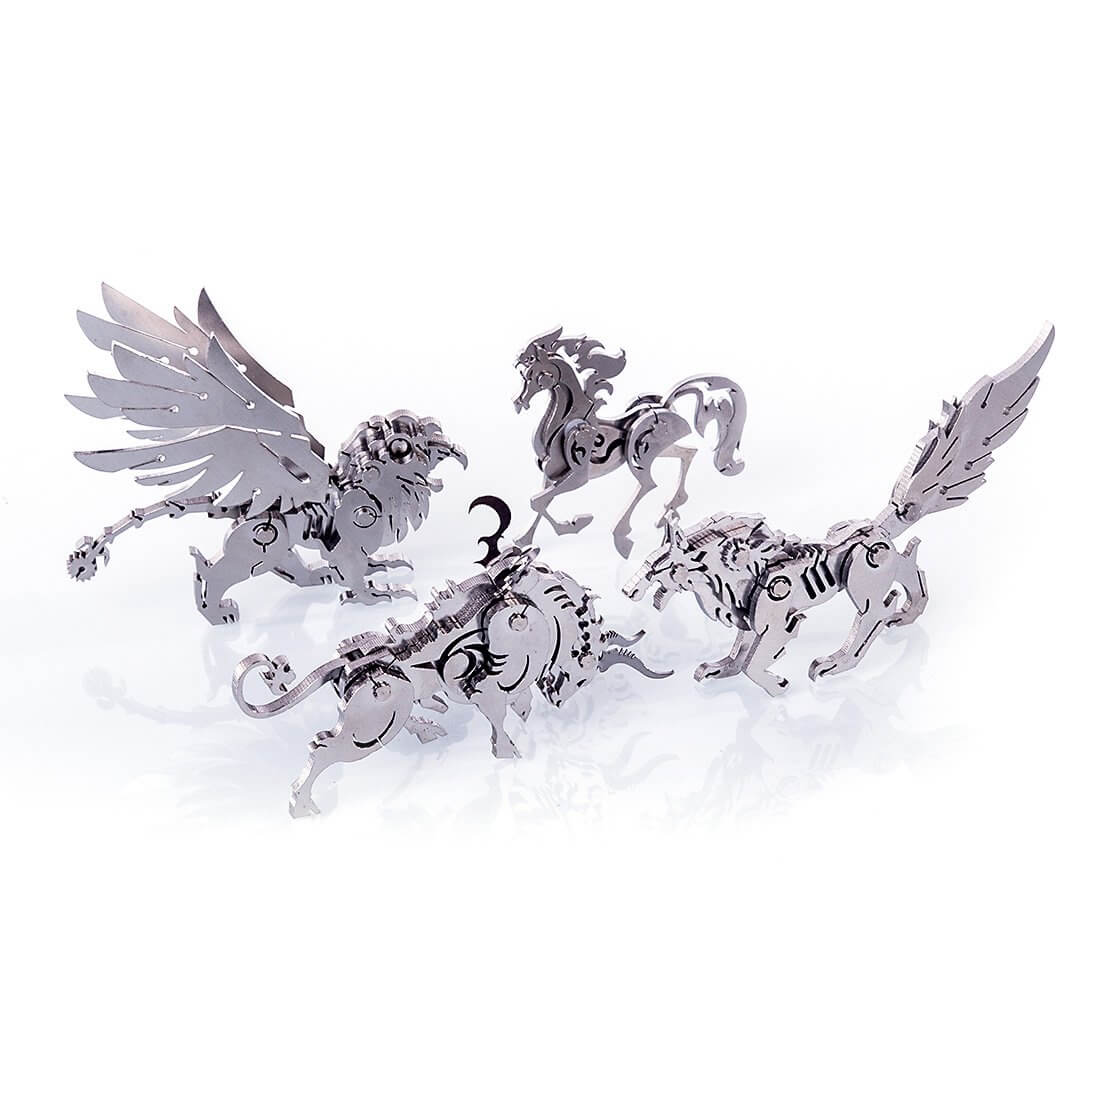 4PCS Griffin Wild Wolf Cattle Horse DIY 3D Stainless Steel Metal Puzzle Model